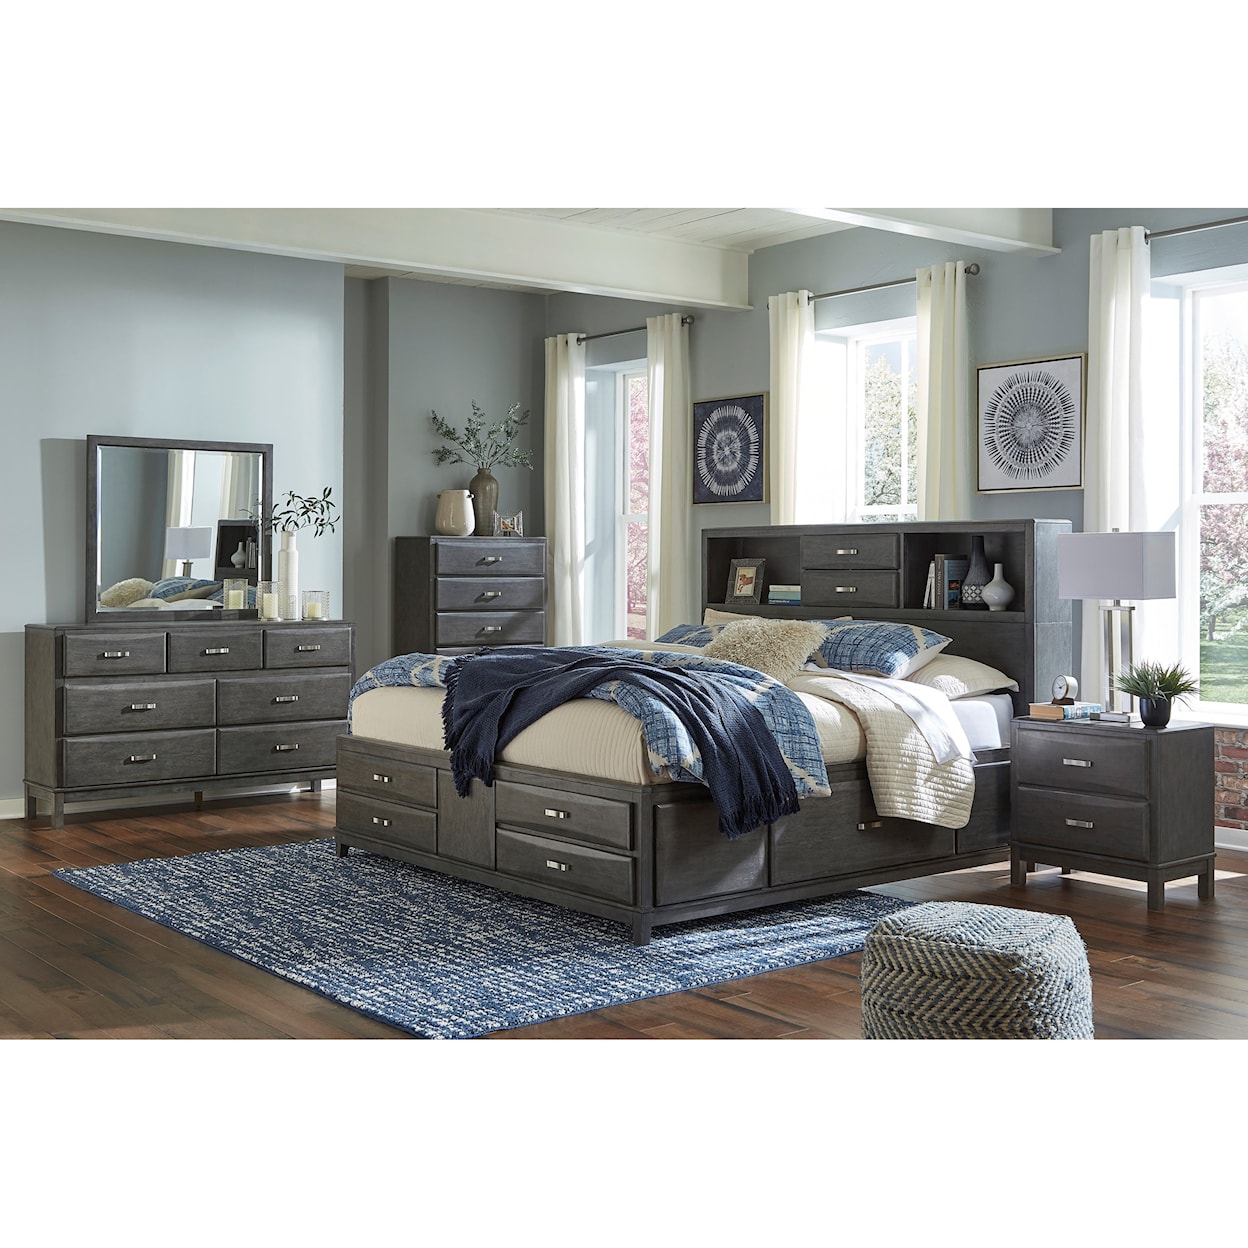 Signature Design by Ashley Caitbrook Full Bedroom Group